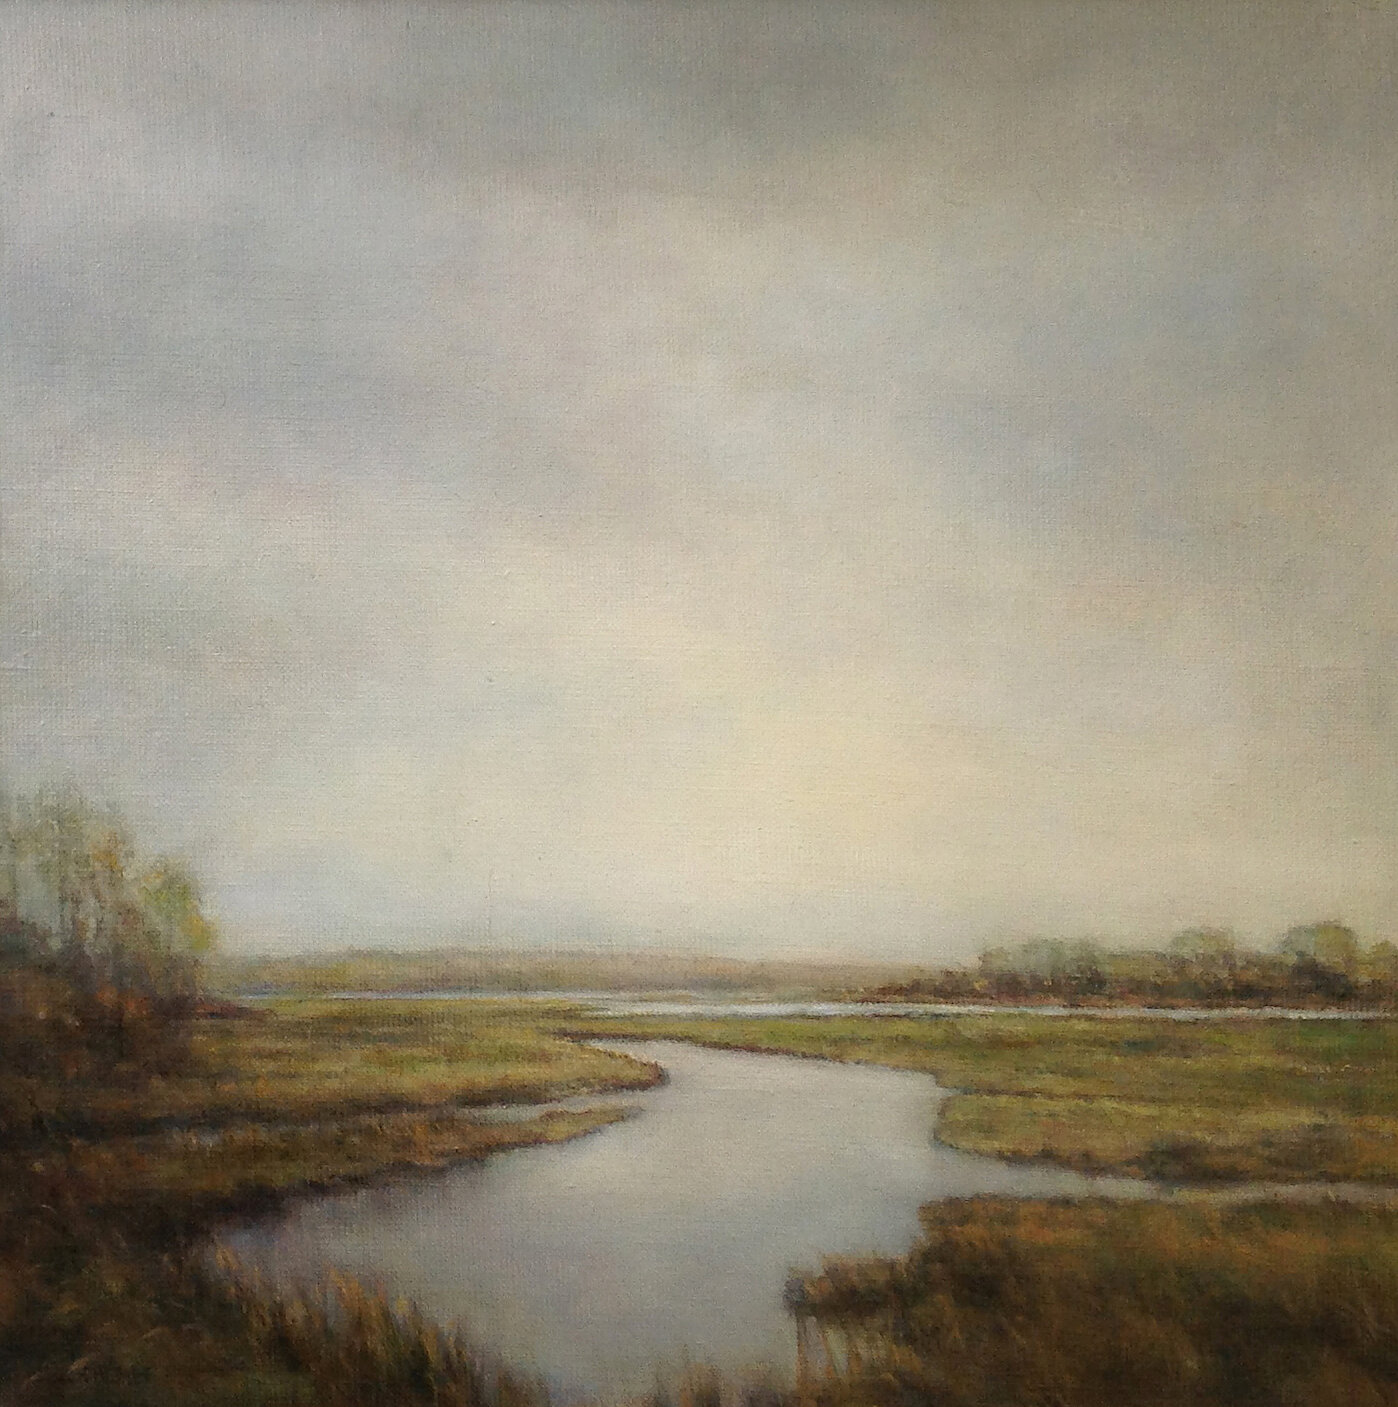  Mary Lou Schempf  Afternoon, Barn Island,  16” x 16”, oil on linen  (available)  